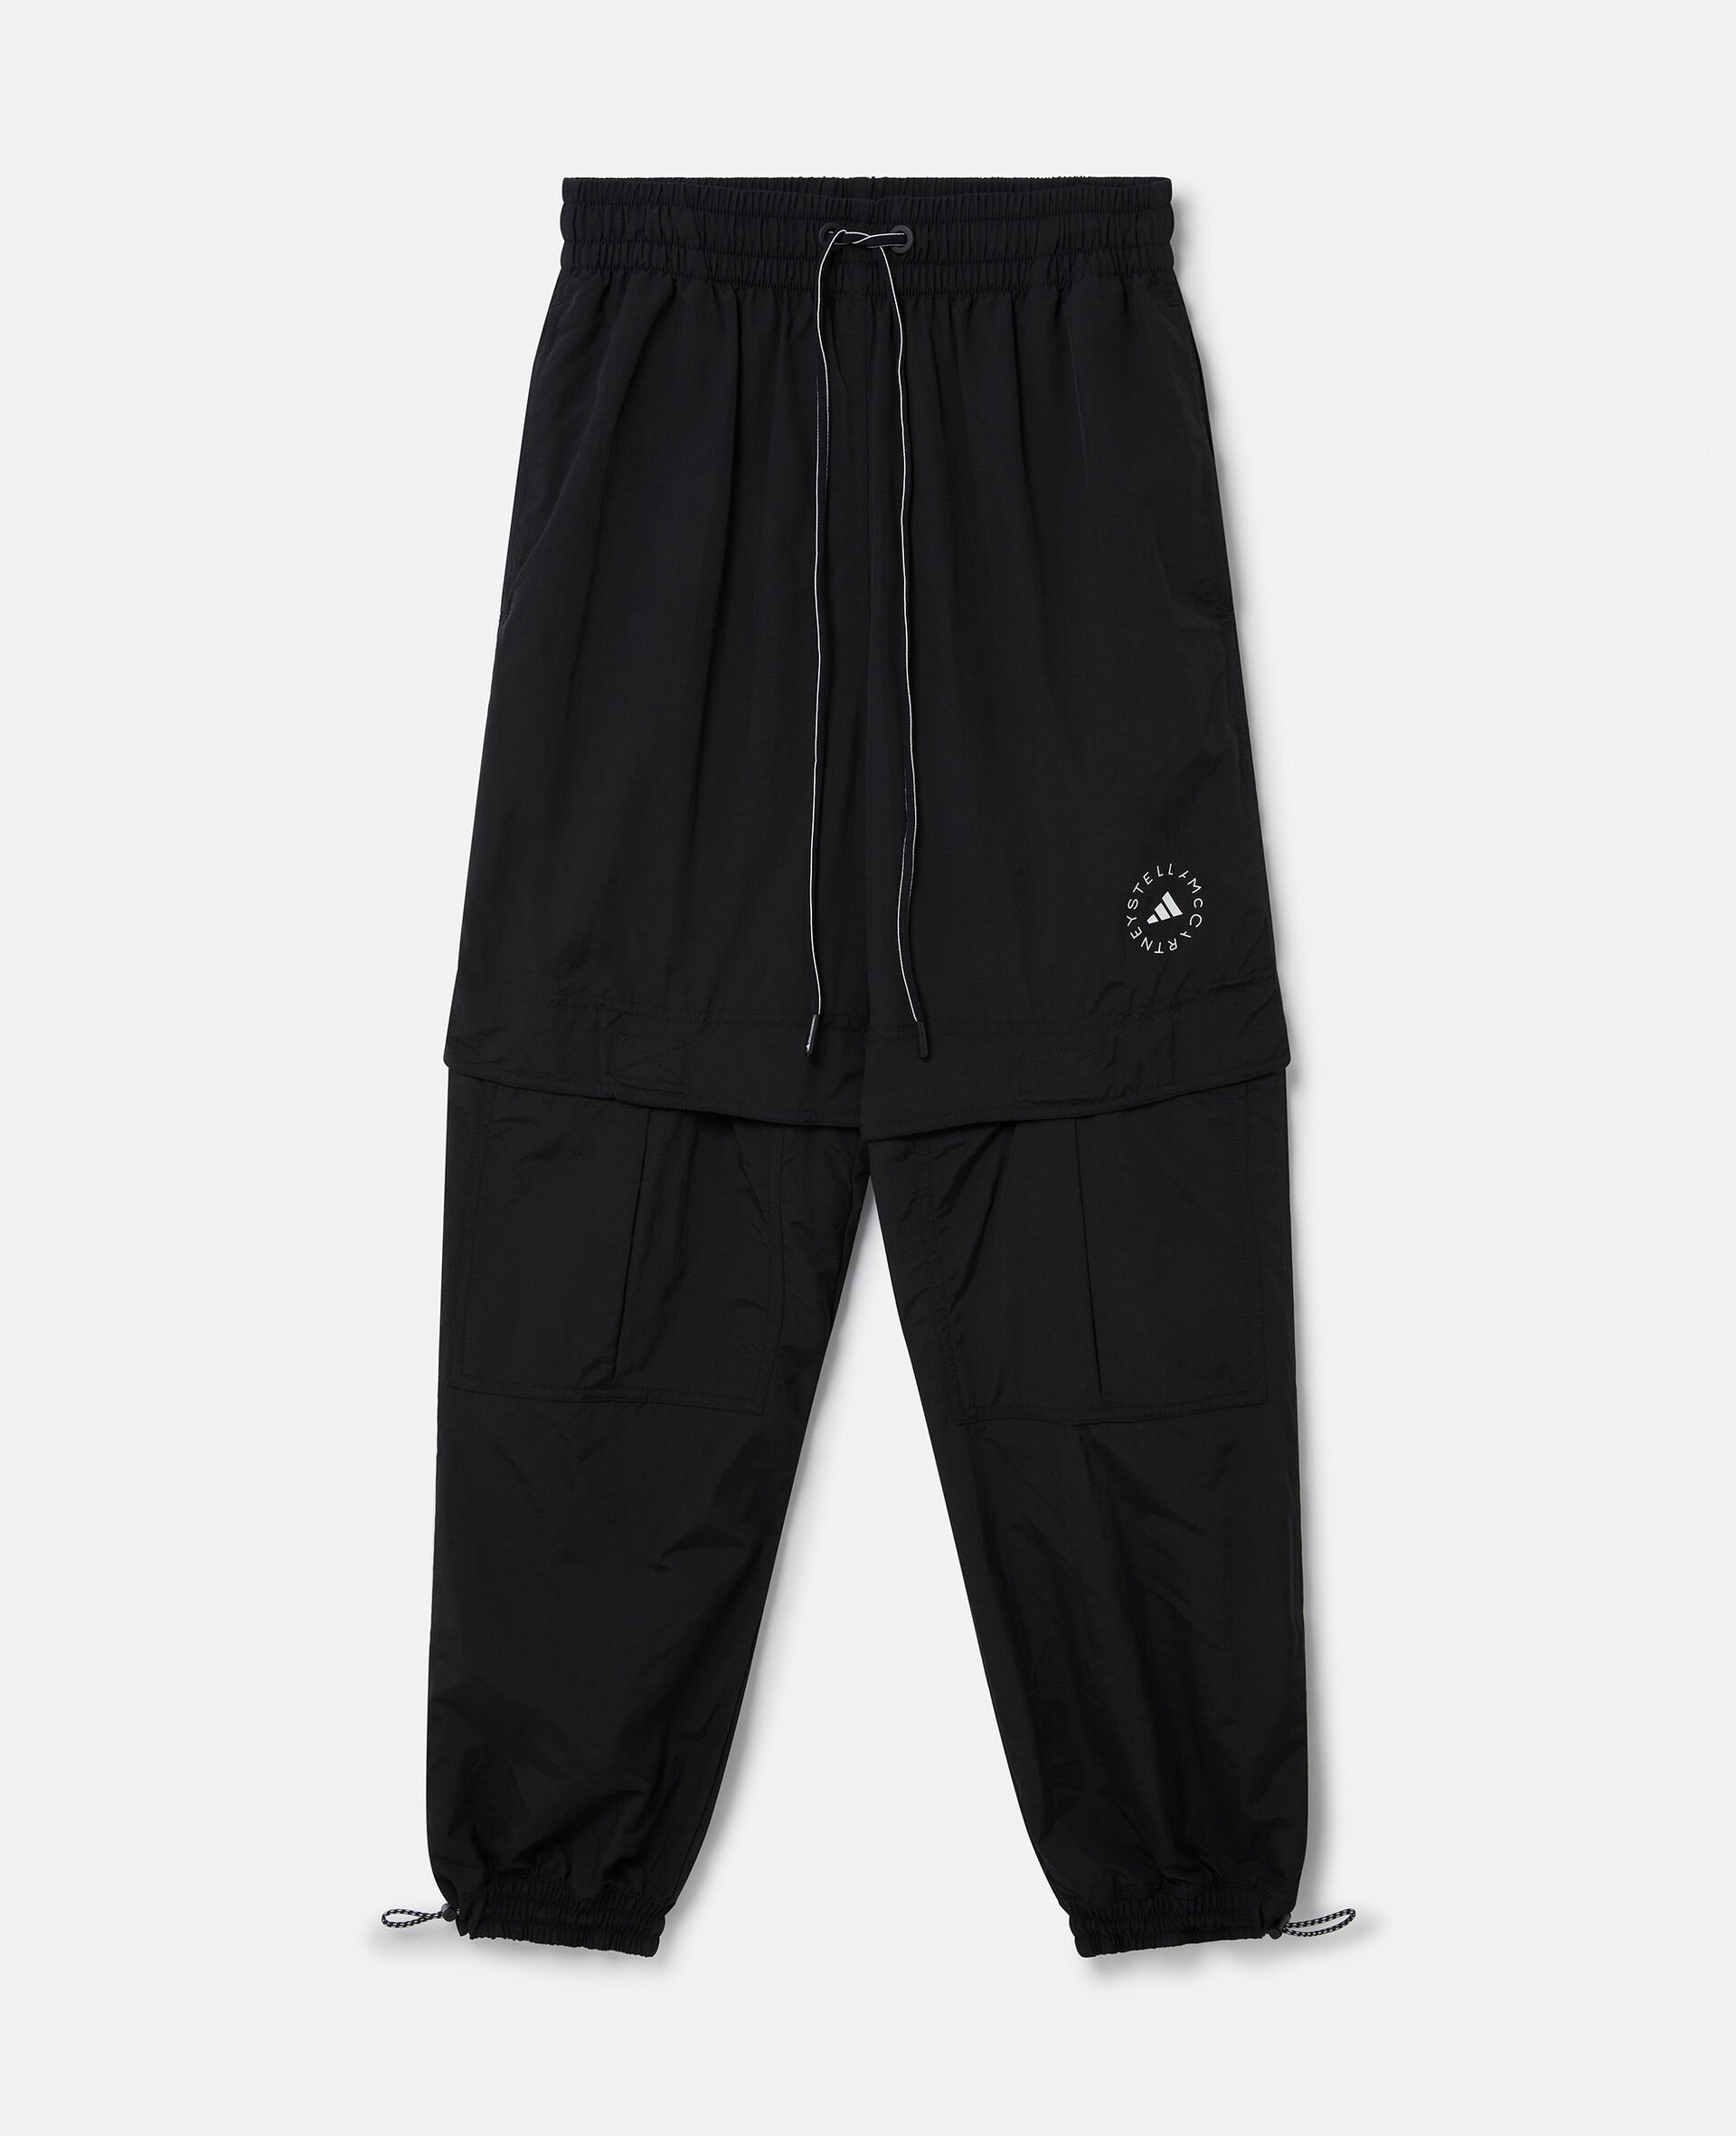 TrueCasuals Woven Trackpants-Black-large image number 0